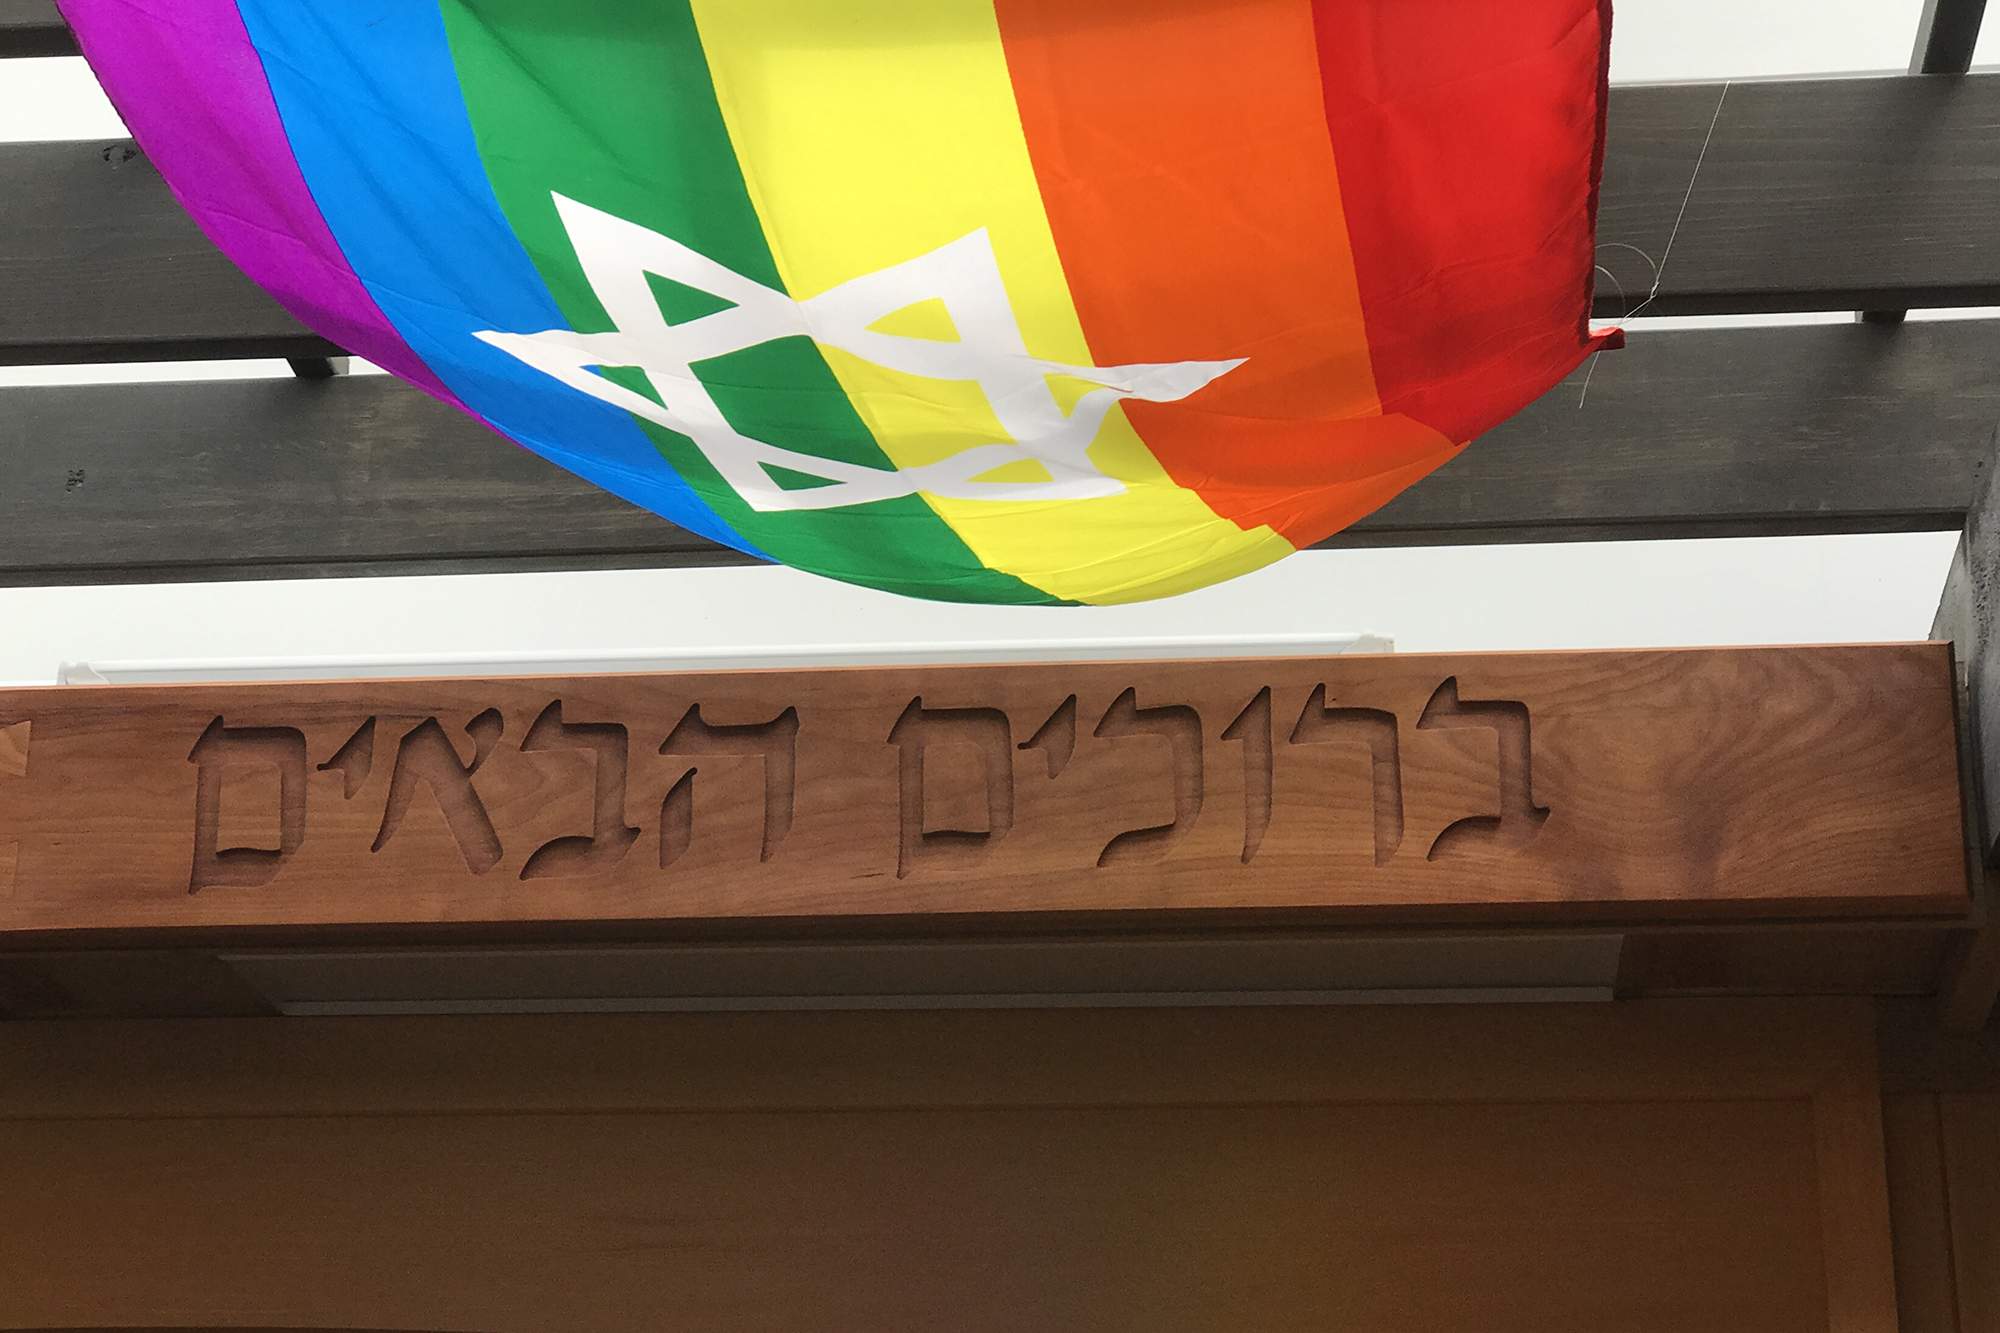 We Welcome all Jews, Regardless of Sexual Orientation or Gender Identity